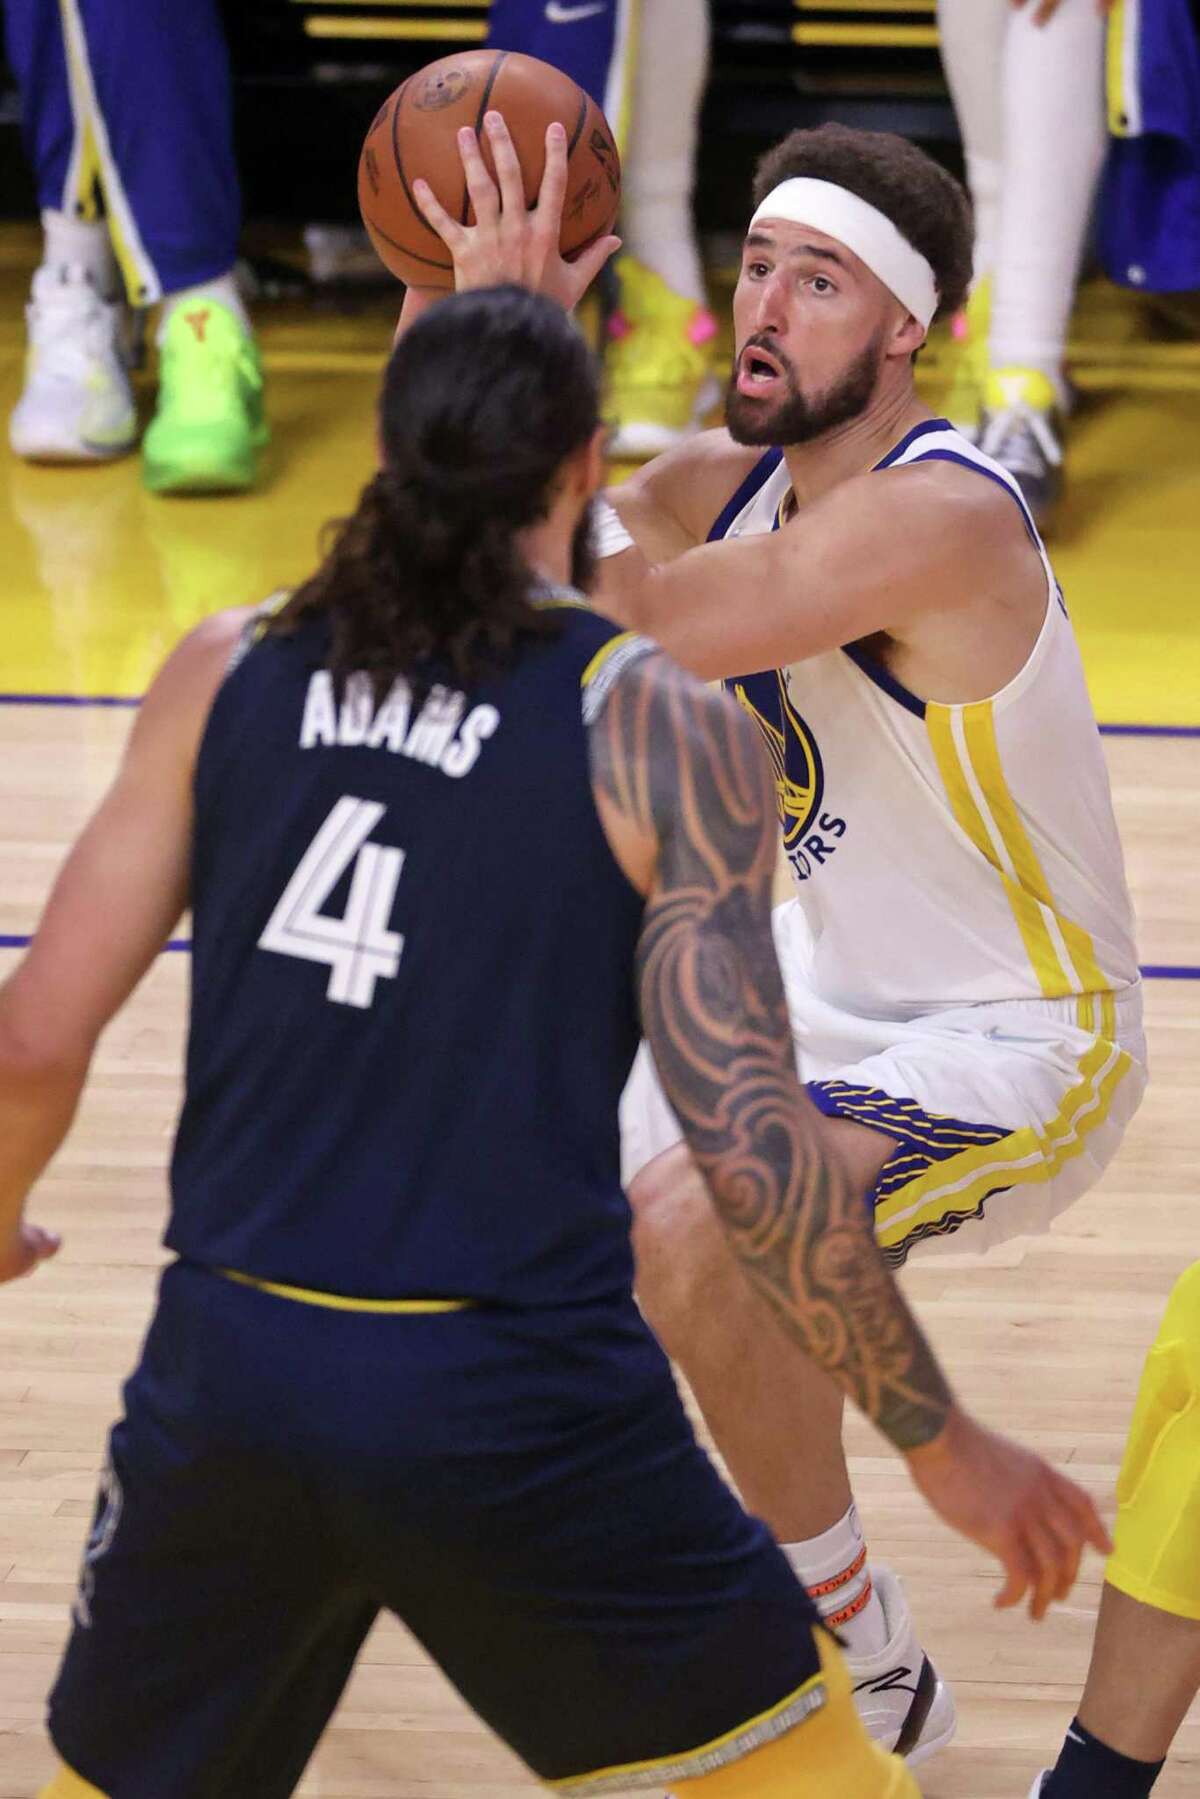 Golden State Warriors’ Klay Thompson looks to shoot against Memphis Grizzlies’ Steven Adams during Game 4 of NBA Western Conference Semifinals at Chase Center in San Francisco, Calif., on Monday, May 9, 2022.